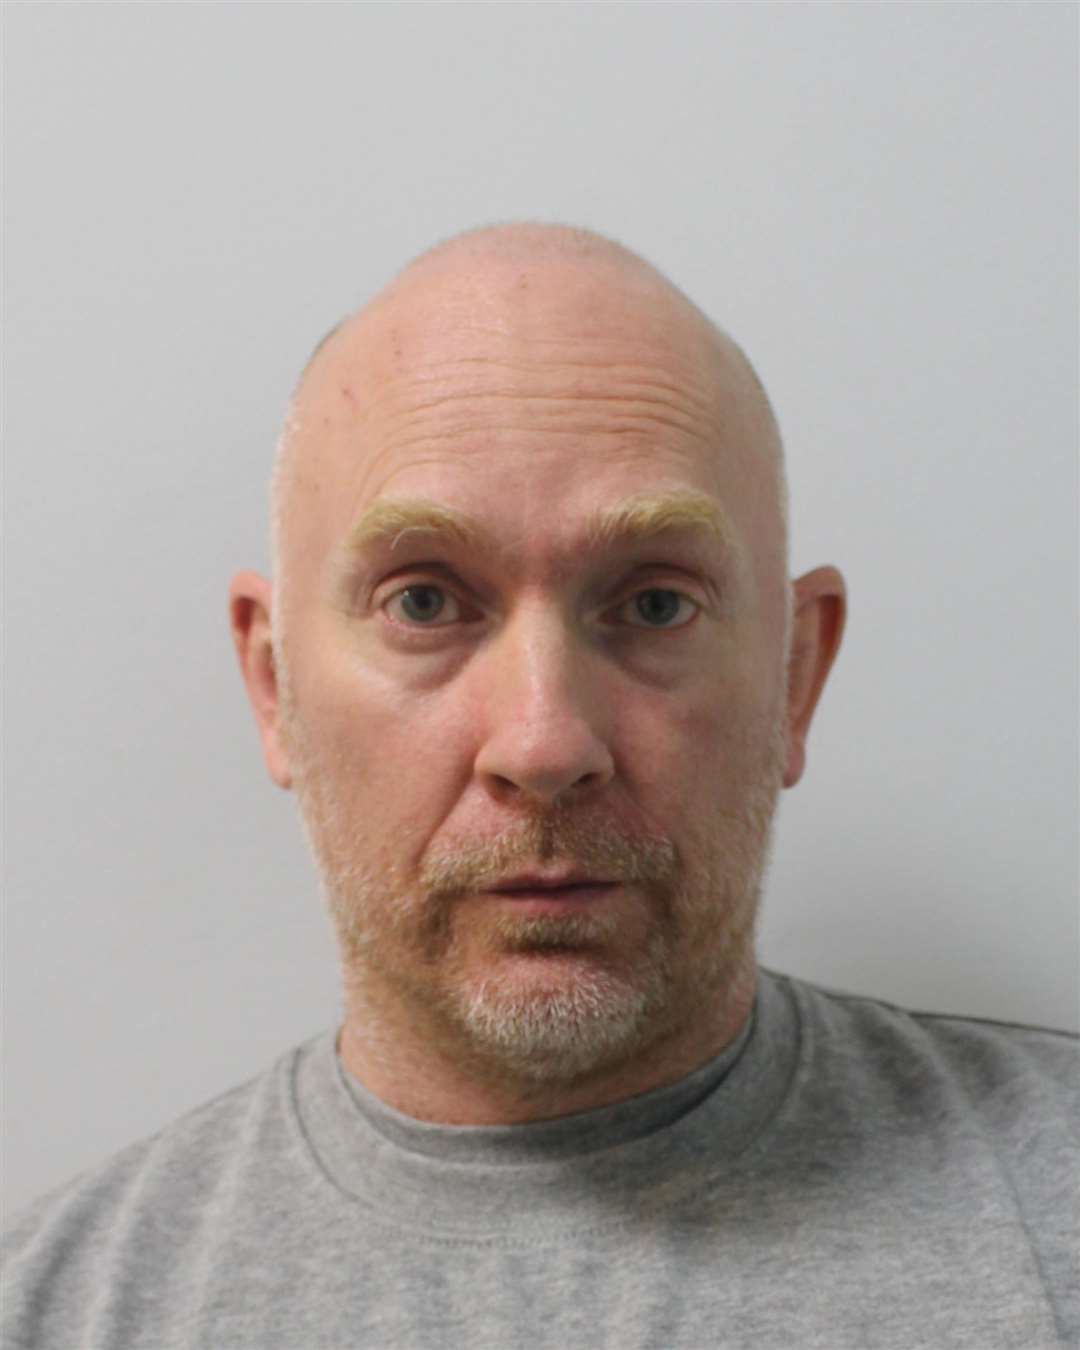 Wayne Couzens pleaded guilty to murder at the Old Bailey. Photo: Met Police